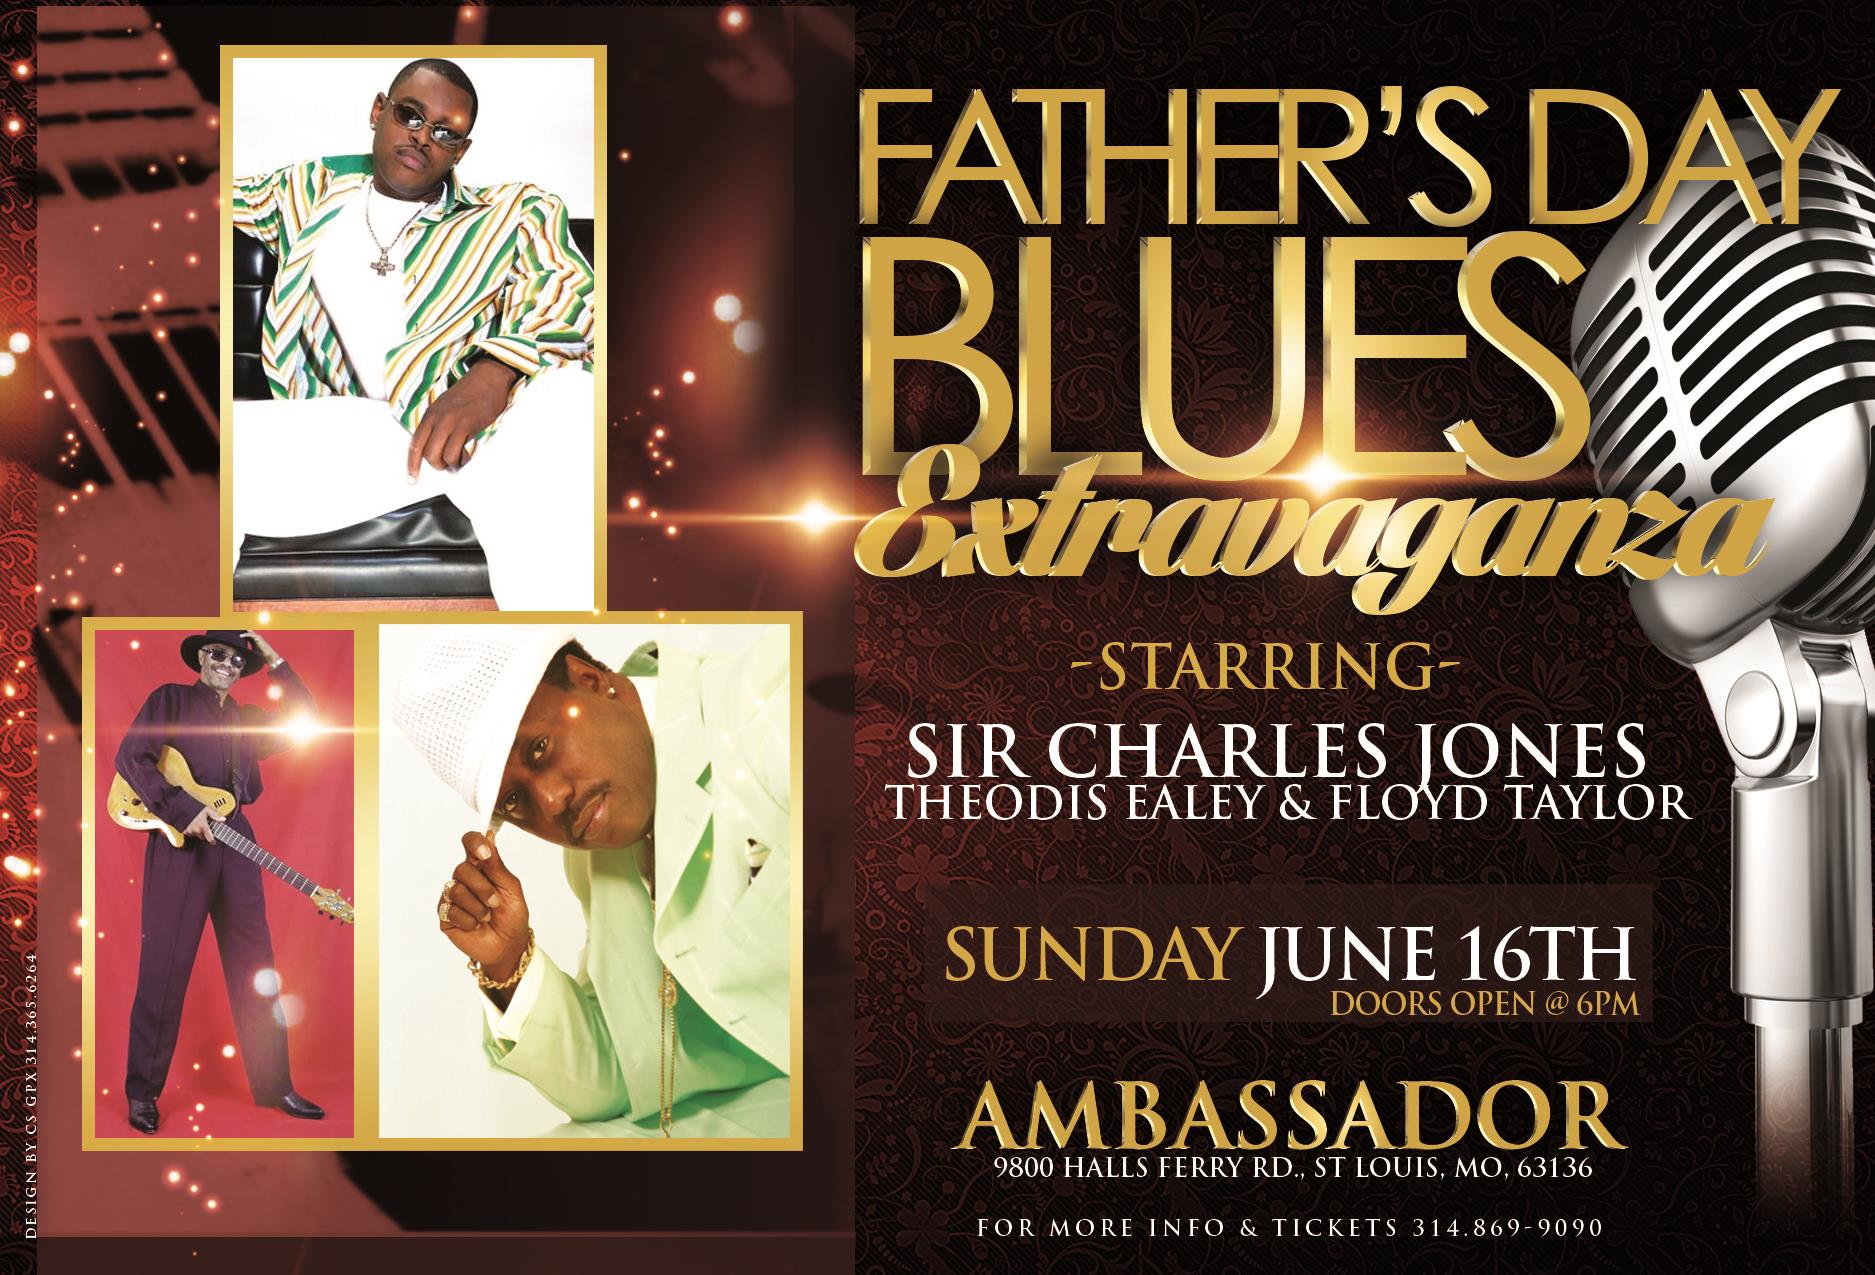 Buy Tickets to Fathers day Blues Show in St. Louis